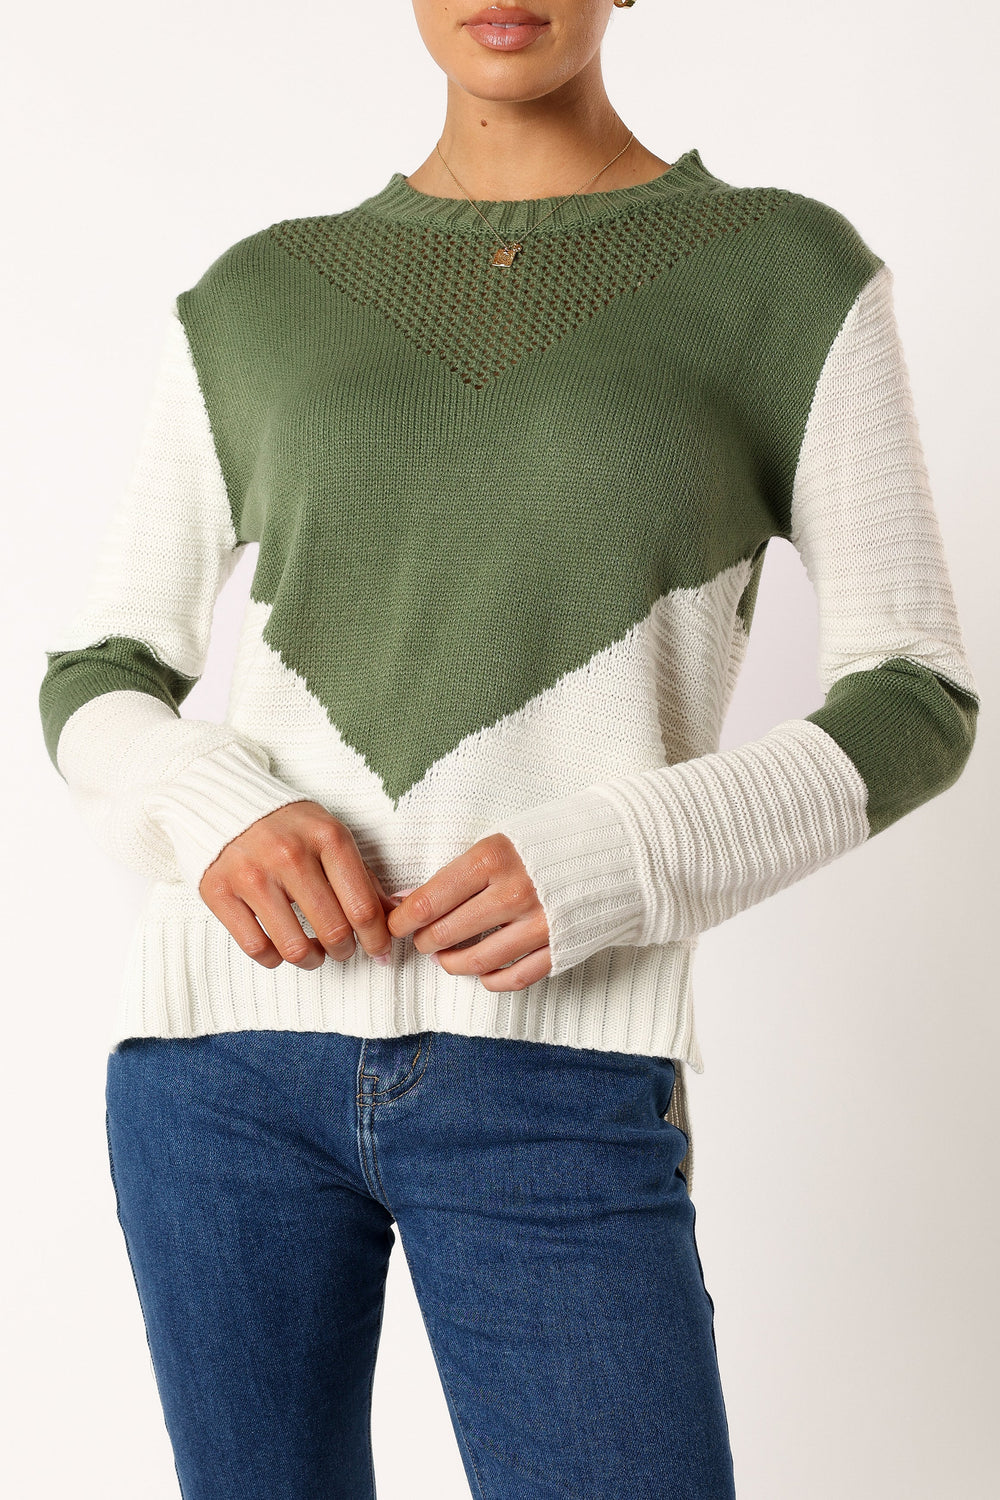 Petal and Pup USA KNITWEAR Lauryn Knit Sweater - Ivory/Olive